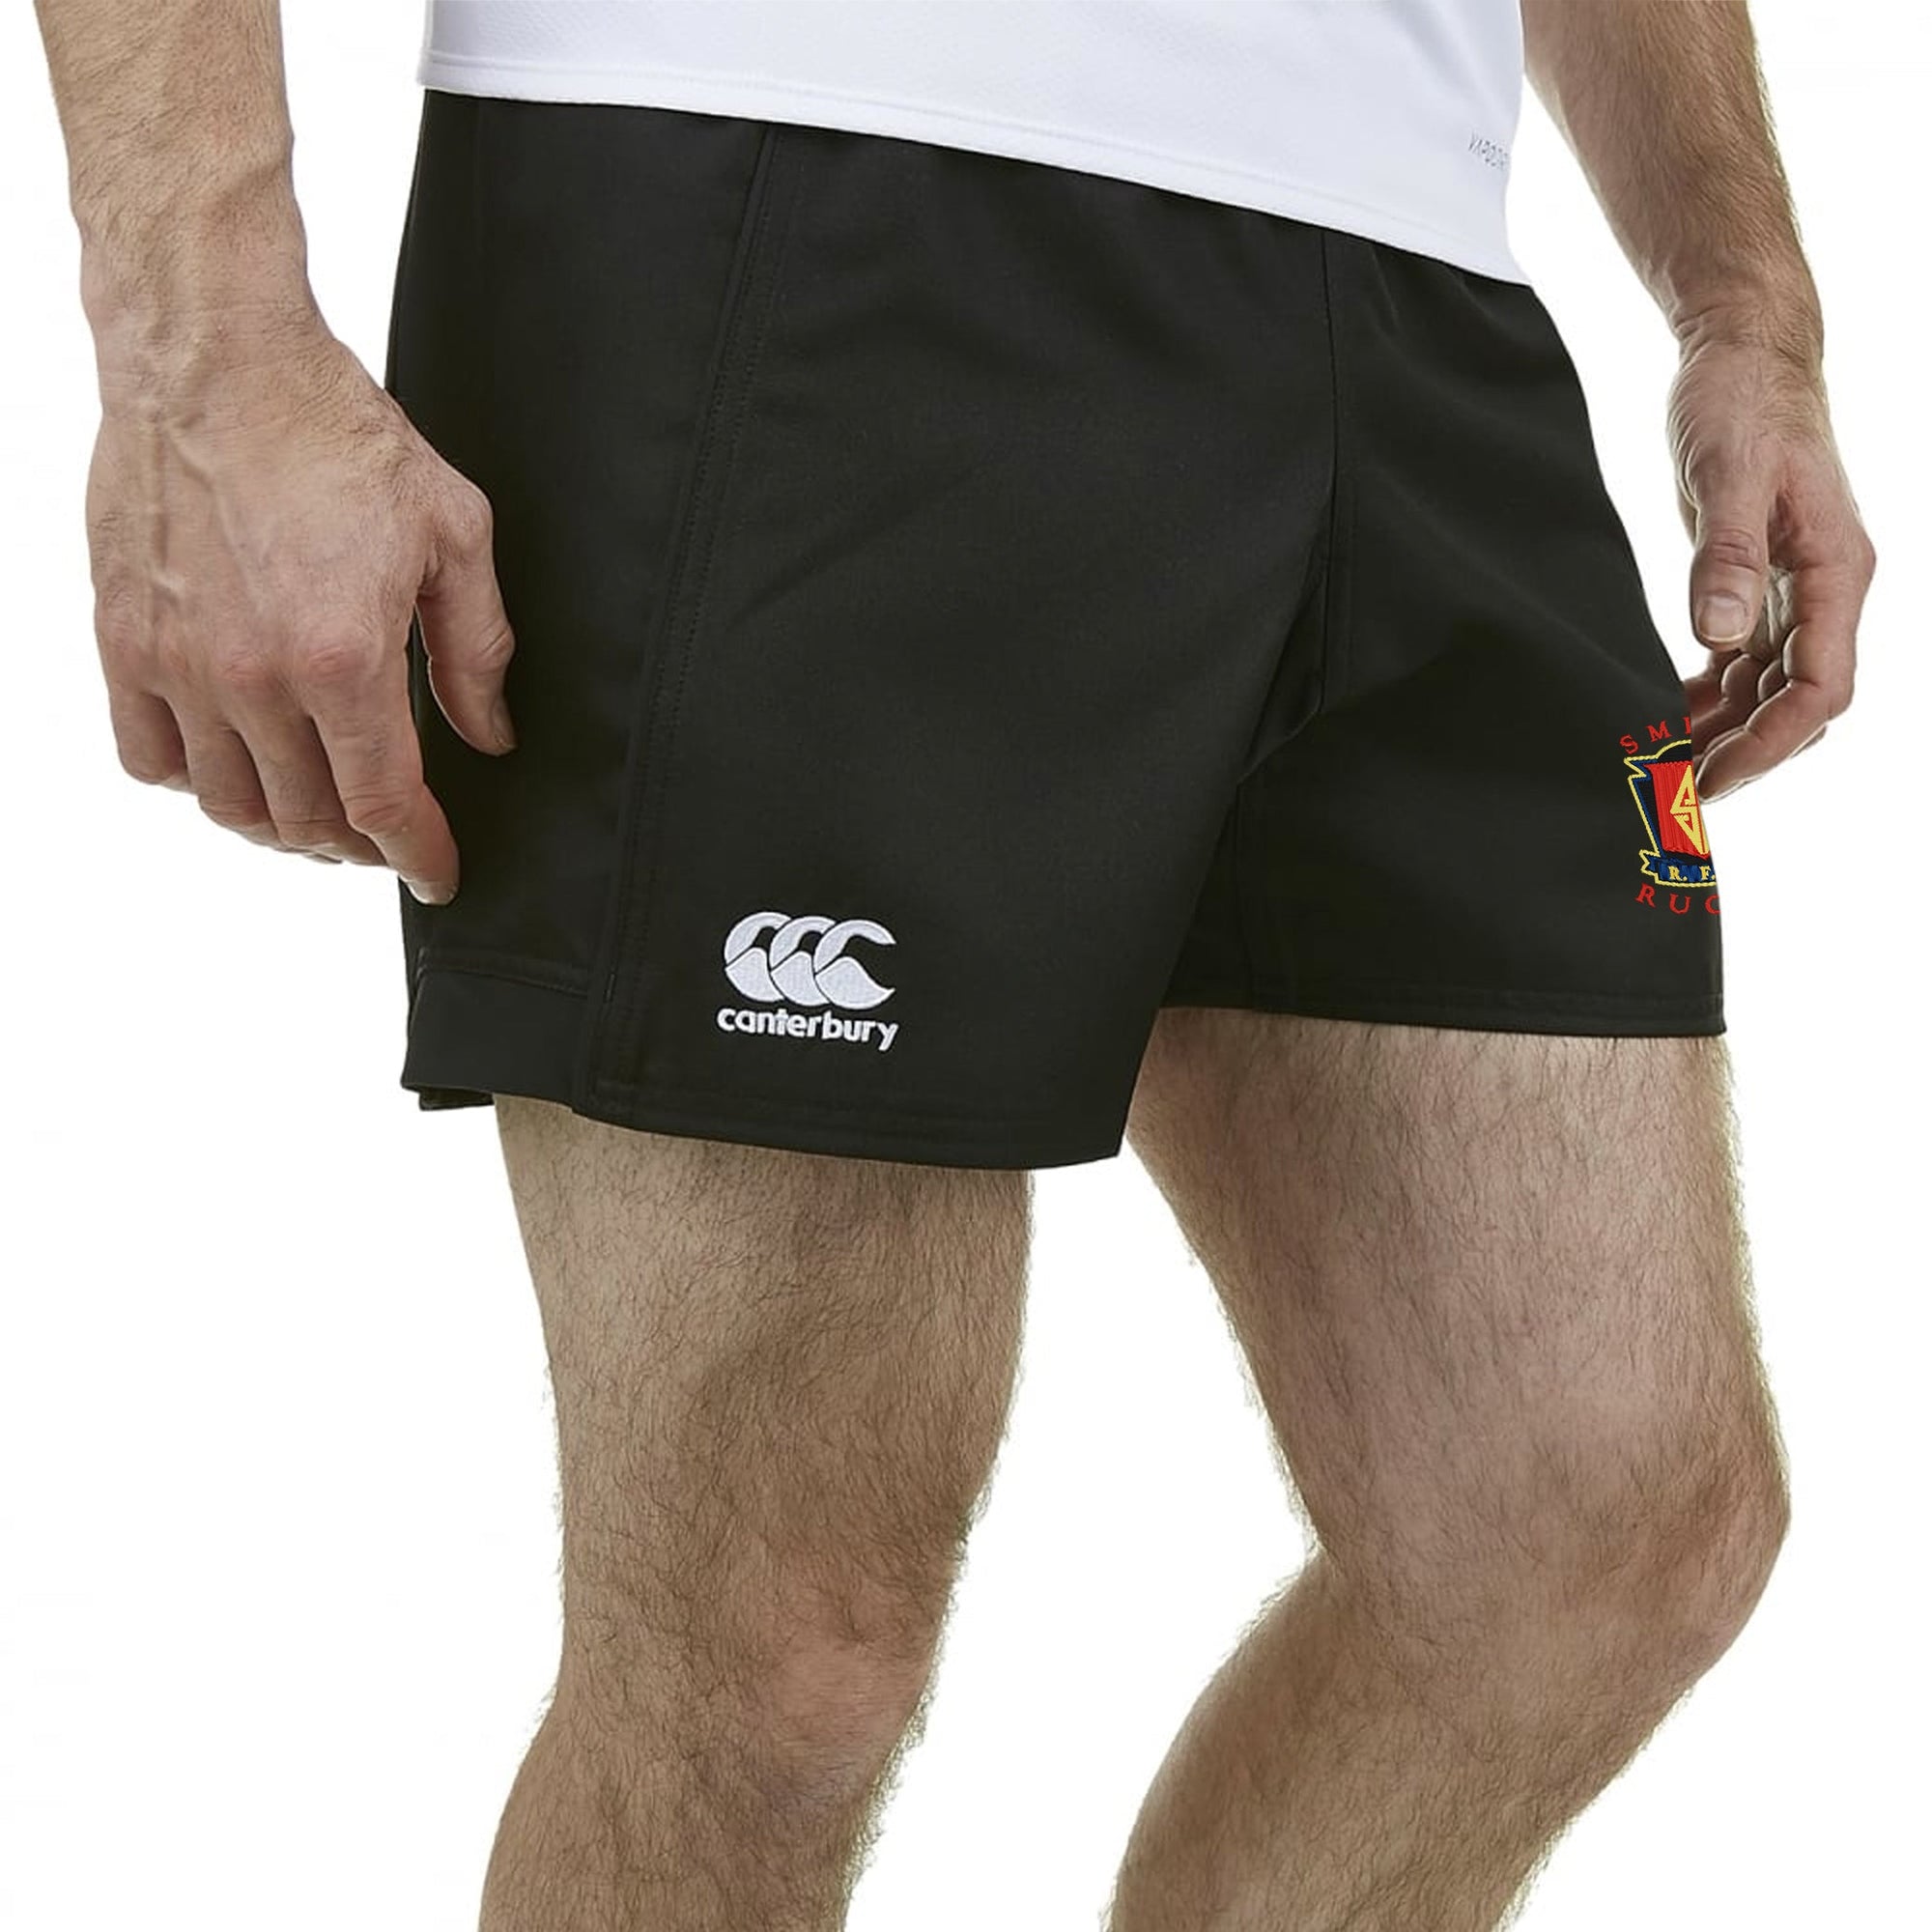 Rugby Imports Smith College RFC CCC Advantage Rugby Short